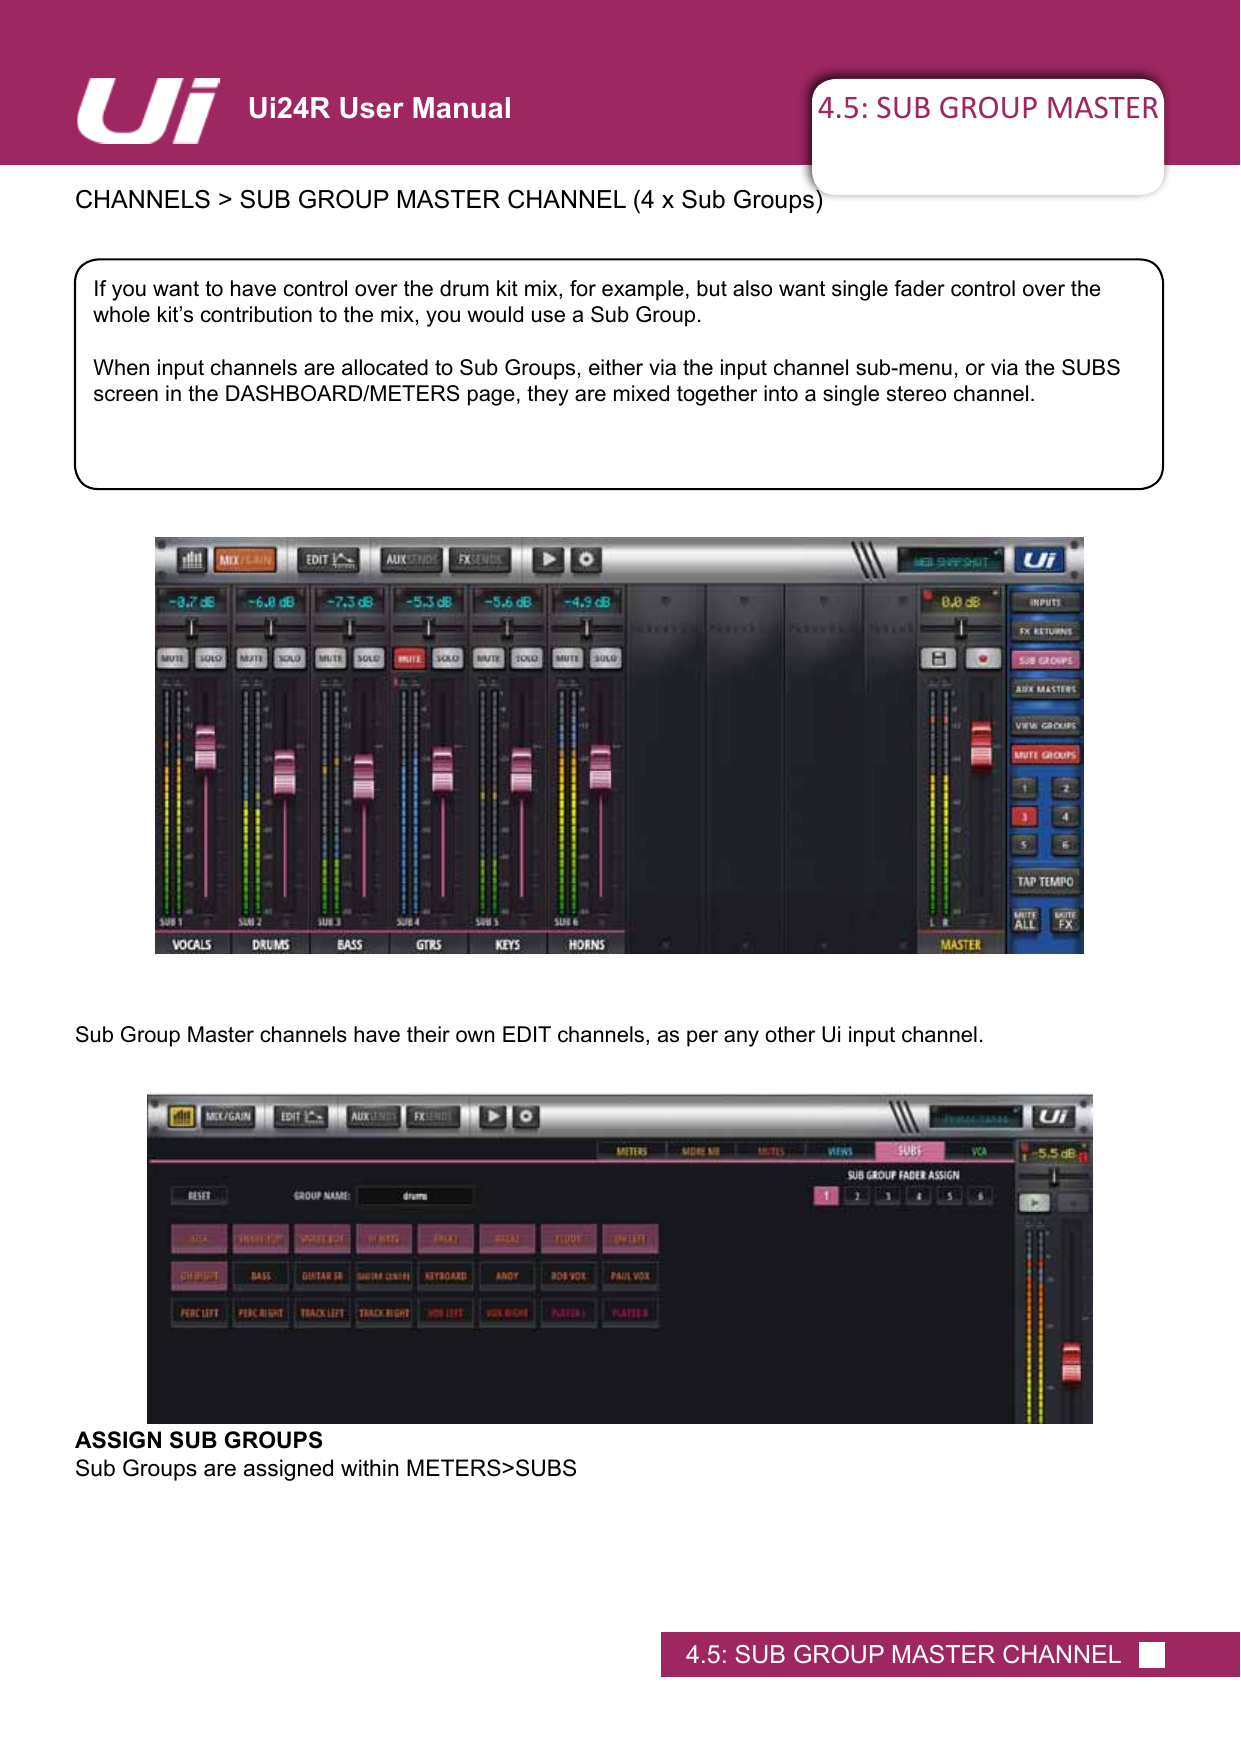 4.5: SUB GROUP MASTERCHANNELS&gt;SUBGROUPMASTERCHANNEL(4xSubGroups)4.5: SUB GROUP MASTER CHANNELUi24R User ManualIf you want to have control over the drum kit mix, for example, but also want single fader control over the wholekit’scontributiontothemix,youwoulduseaSubGroup.When input channels are allocated to Sub Groups, either via the input channel sub-menu, or via the SUBS screen in the DASHBOARD/METERS page, they are mixed together into a single stereo channel.Sub Group Master channels have their own EDIT channels, as per any other Ui input channel.ASSIGN SUB GROUPSSub Groups are assigned within METERS&gt;SUBS